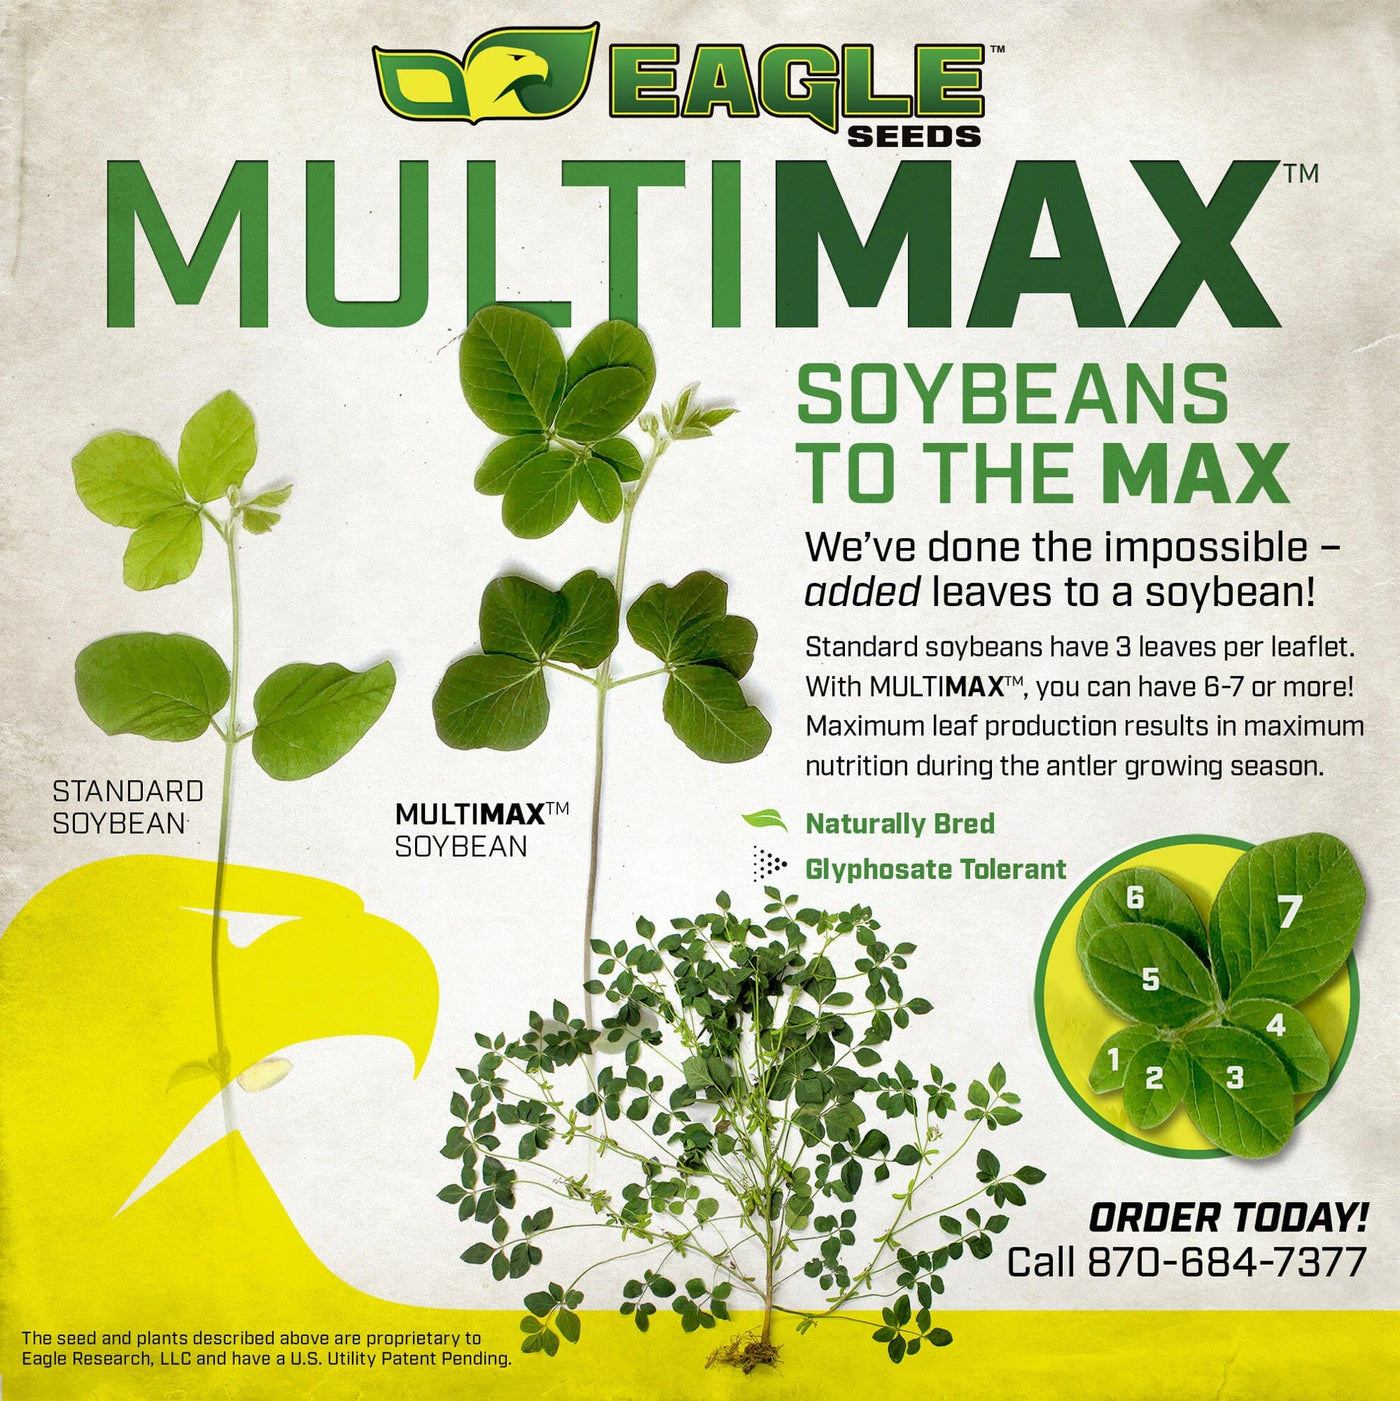 Eagle MULTIMAX Soybeans